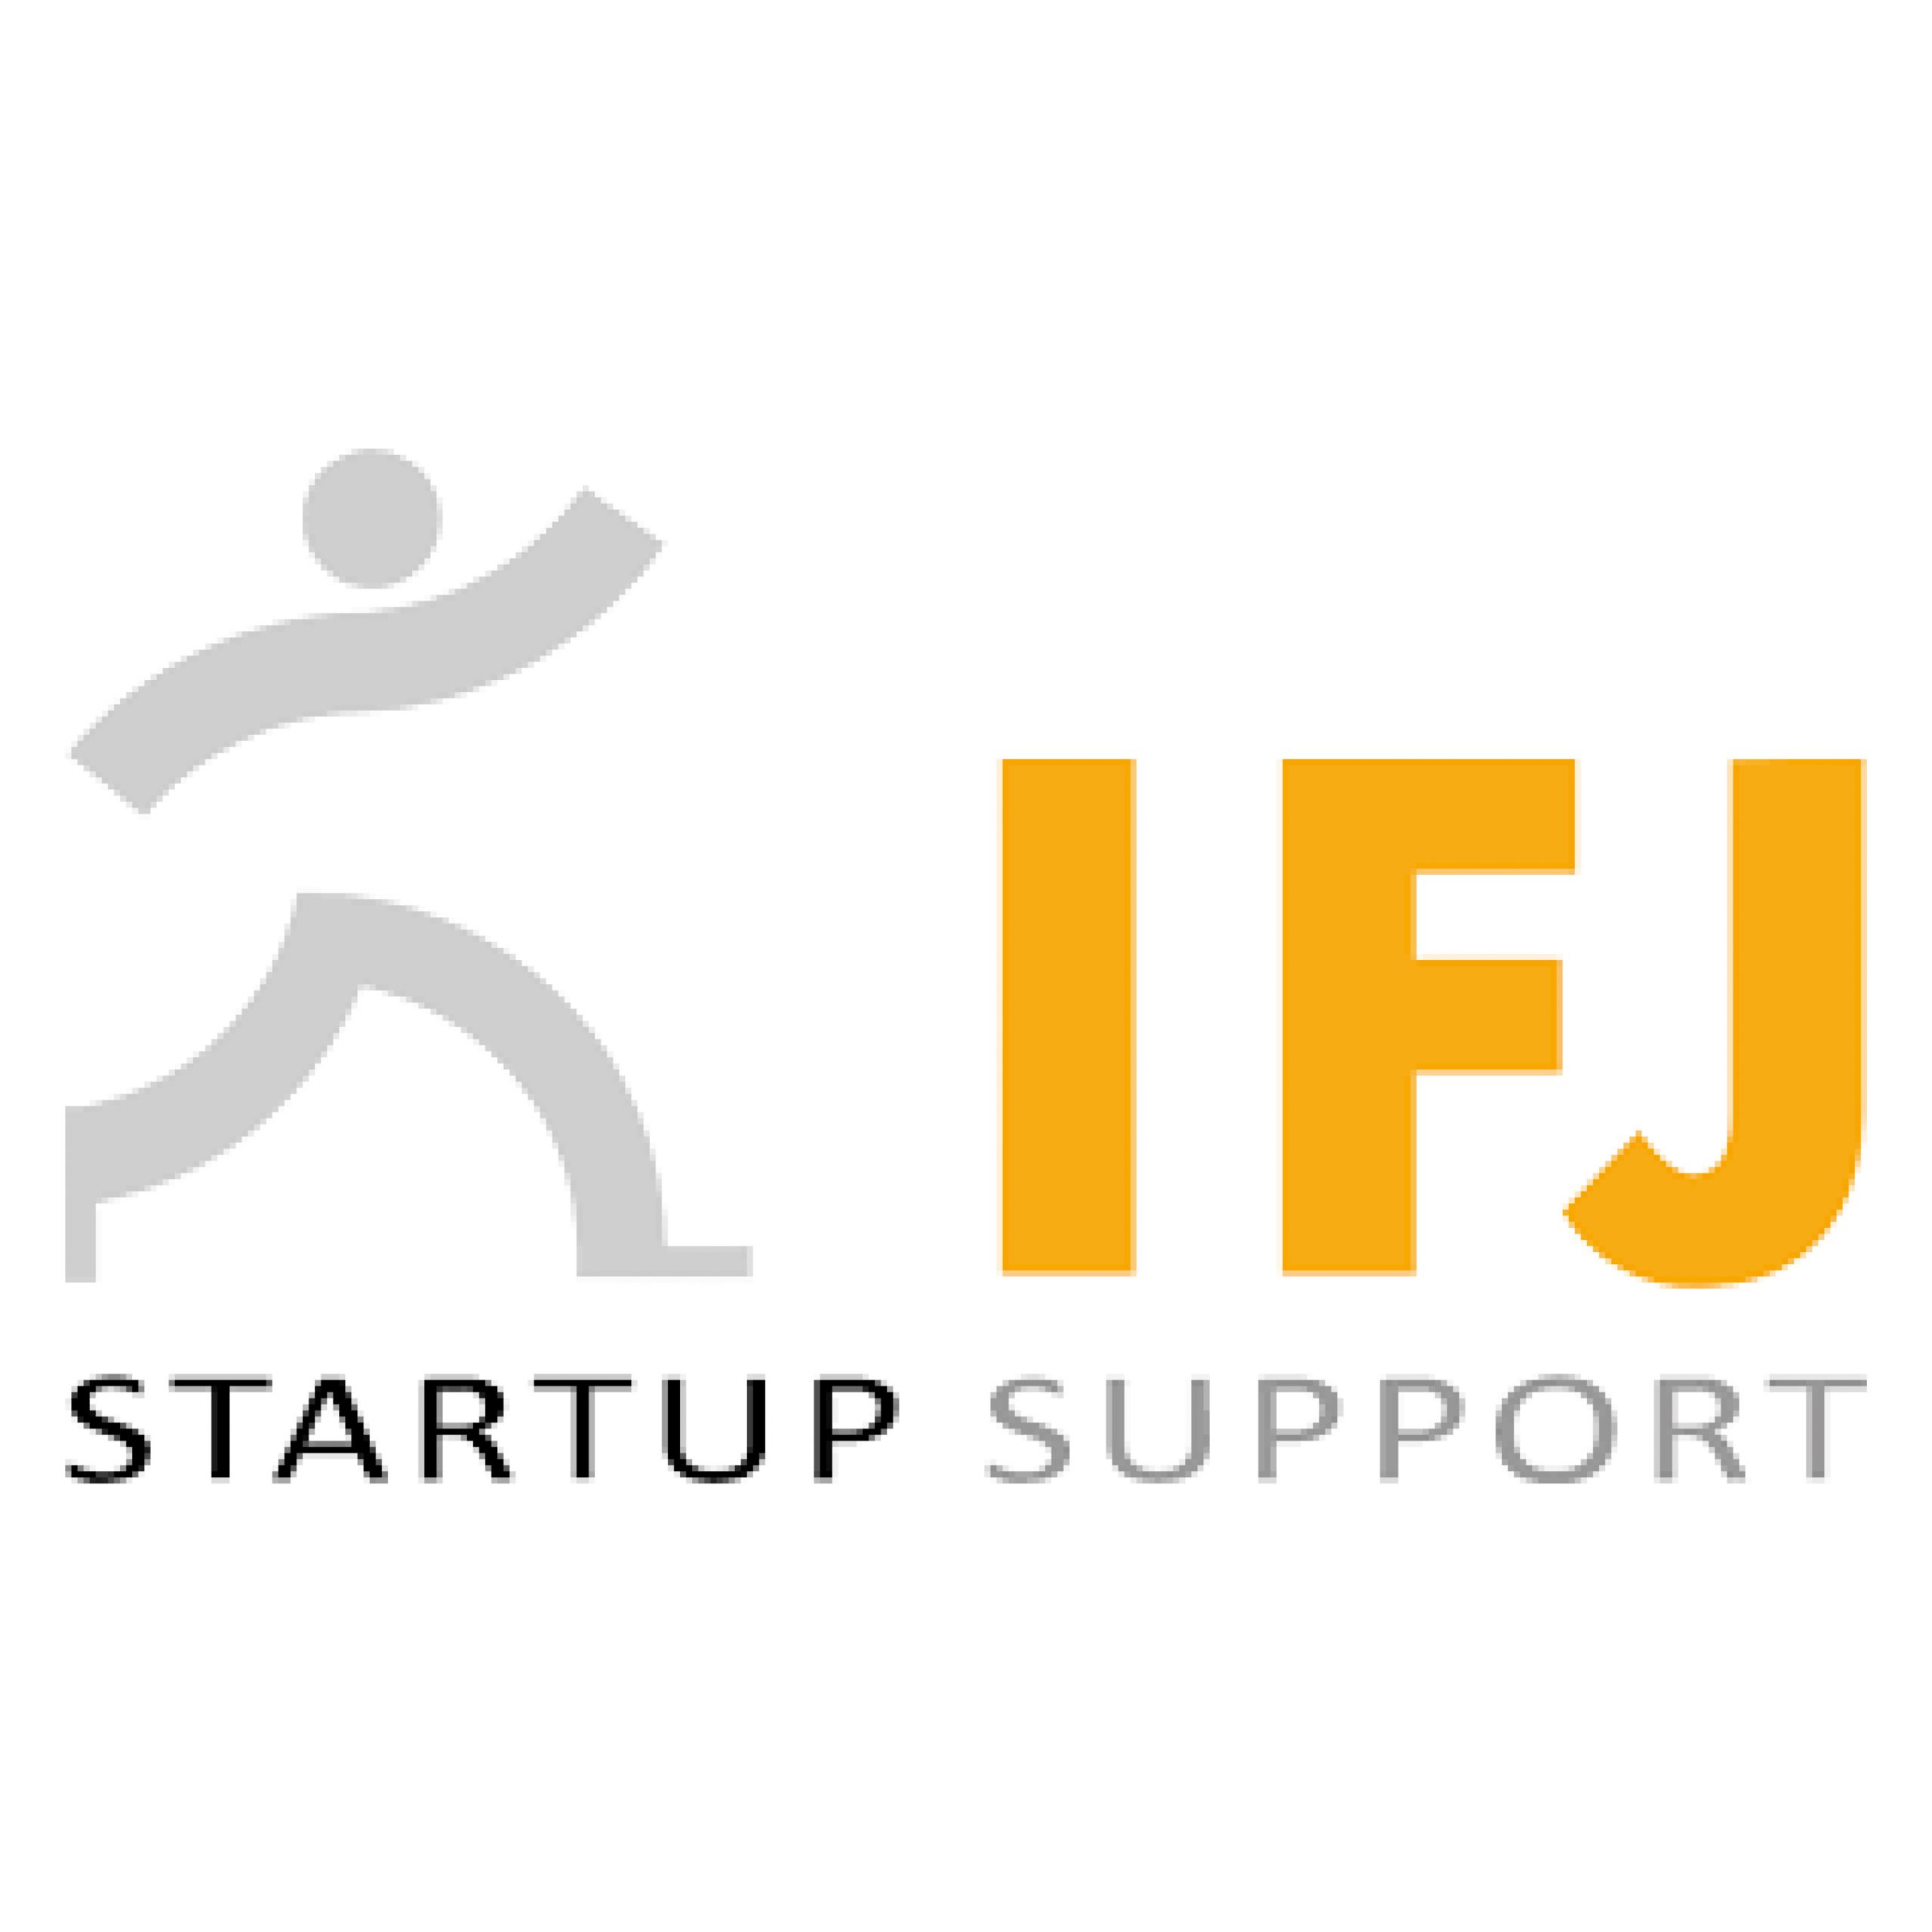 IFJ Startup Support